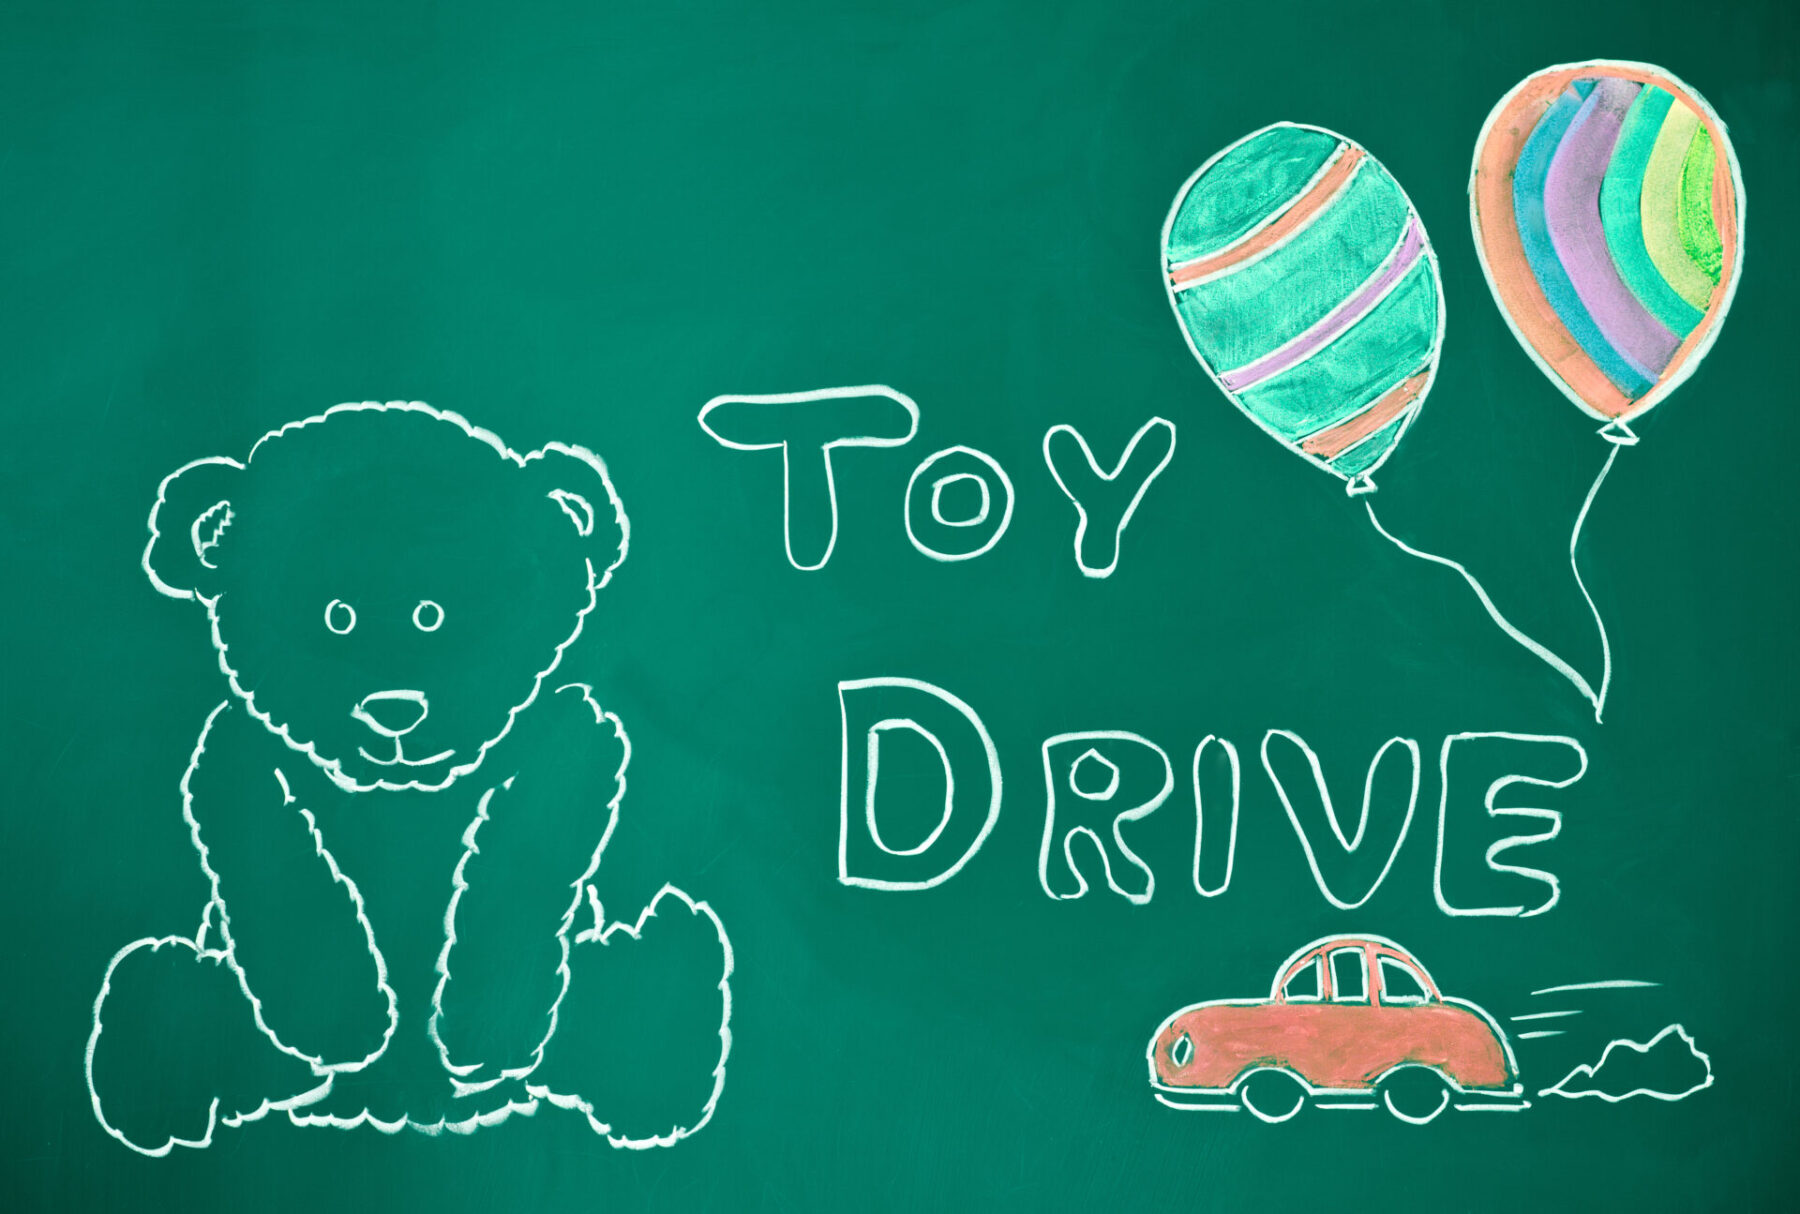 Toy drive concept on a blackboard. Cuddly teddybear waiting to meet his new owner.